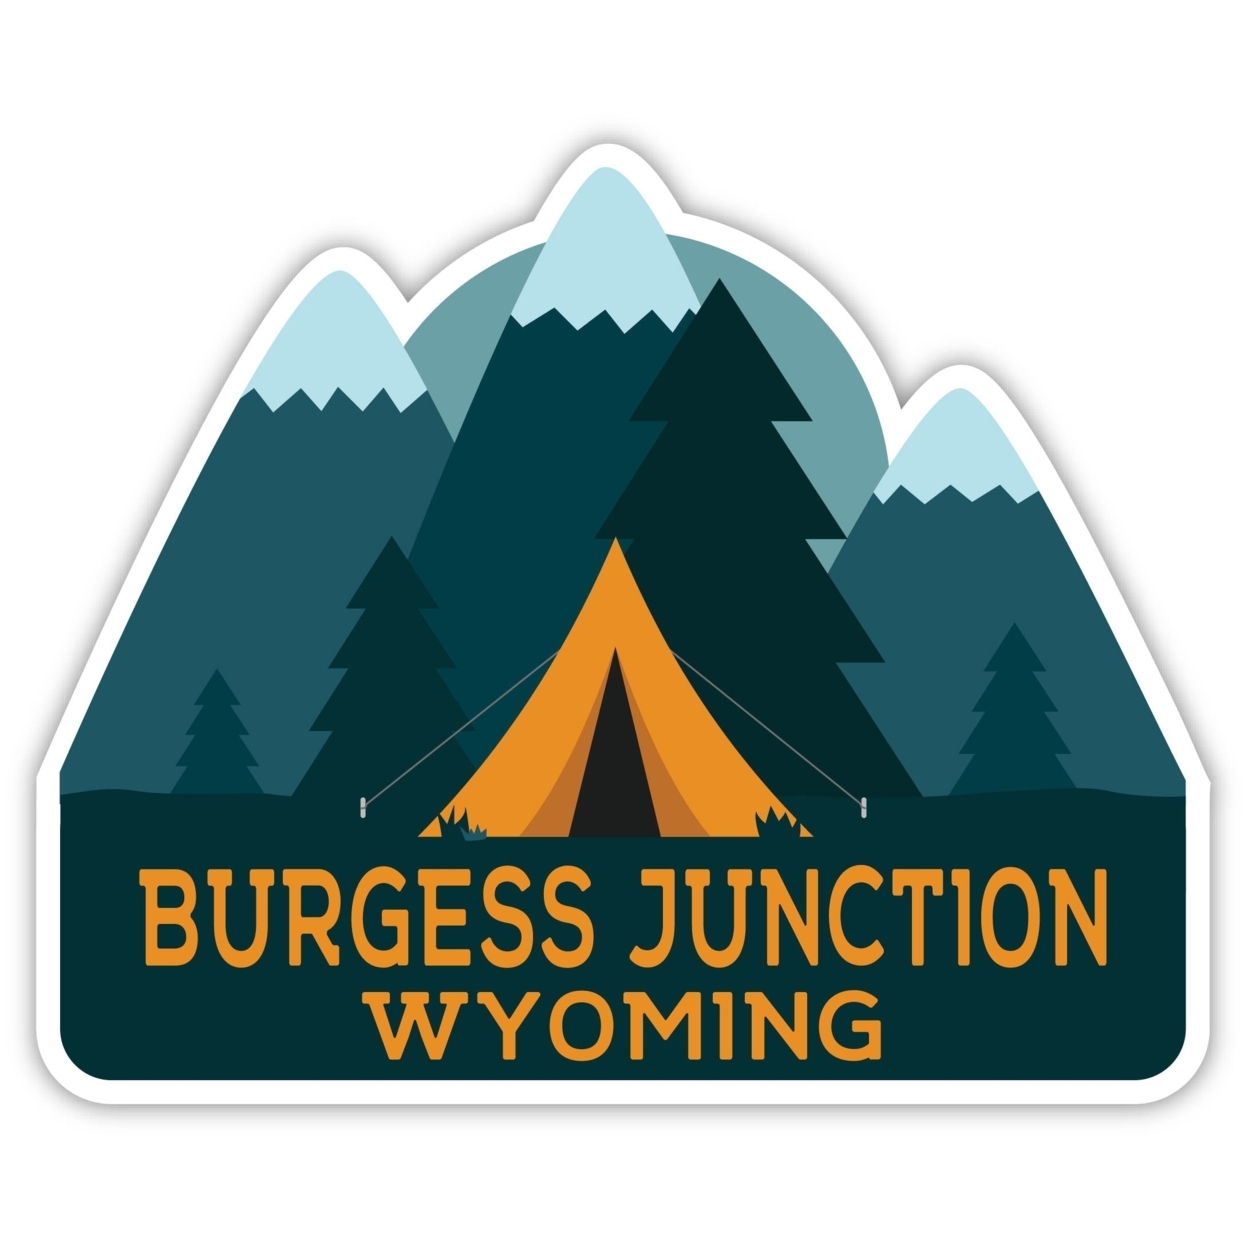 Burgess Junction Wyoming Souvenir Decorative Stickers (Choose Theme And Size) - 4-Pack, 2-Inch, Tent